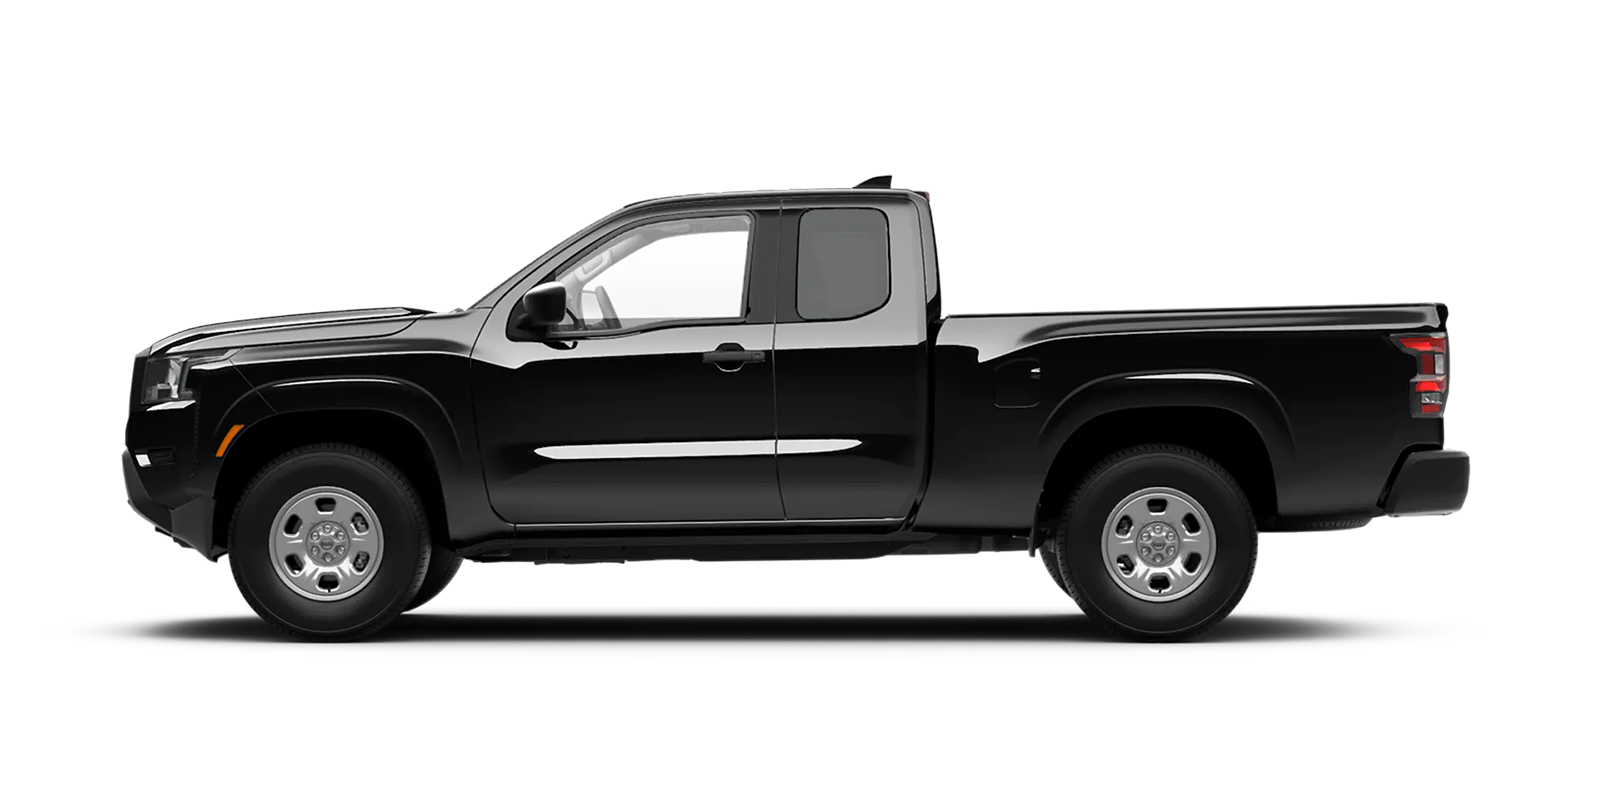 2022 Frontier King Cab S 4x4 in Super Black | Cherokee County Nissan in Holly Springs GA